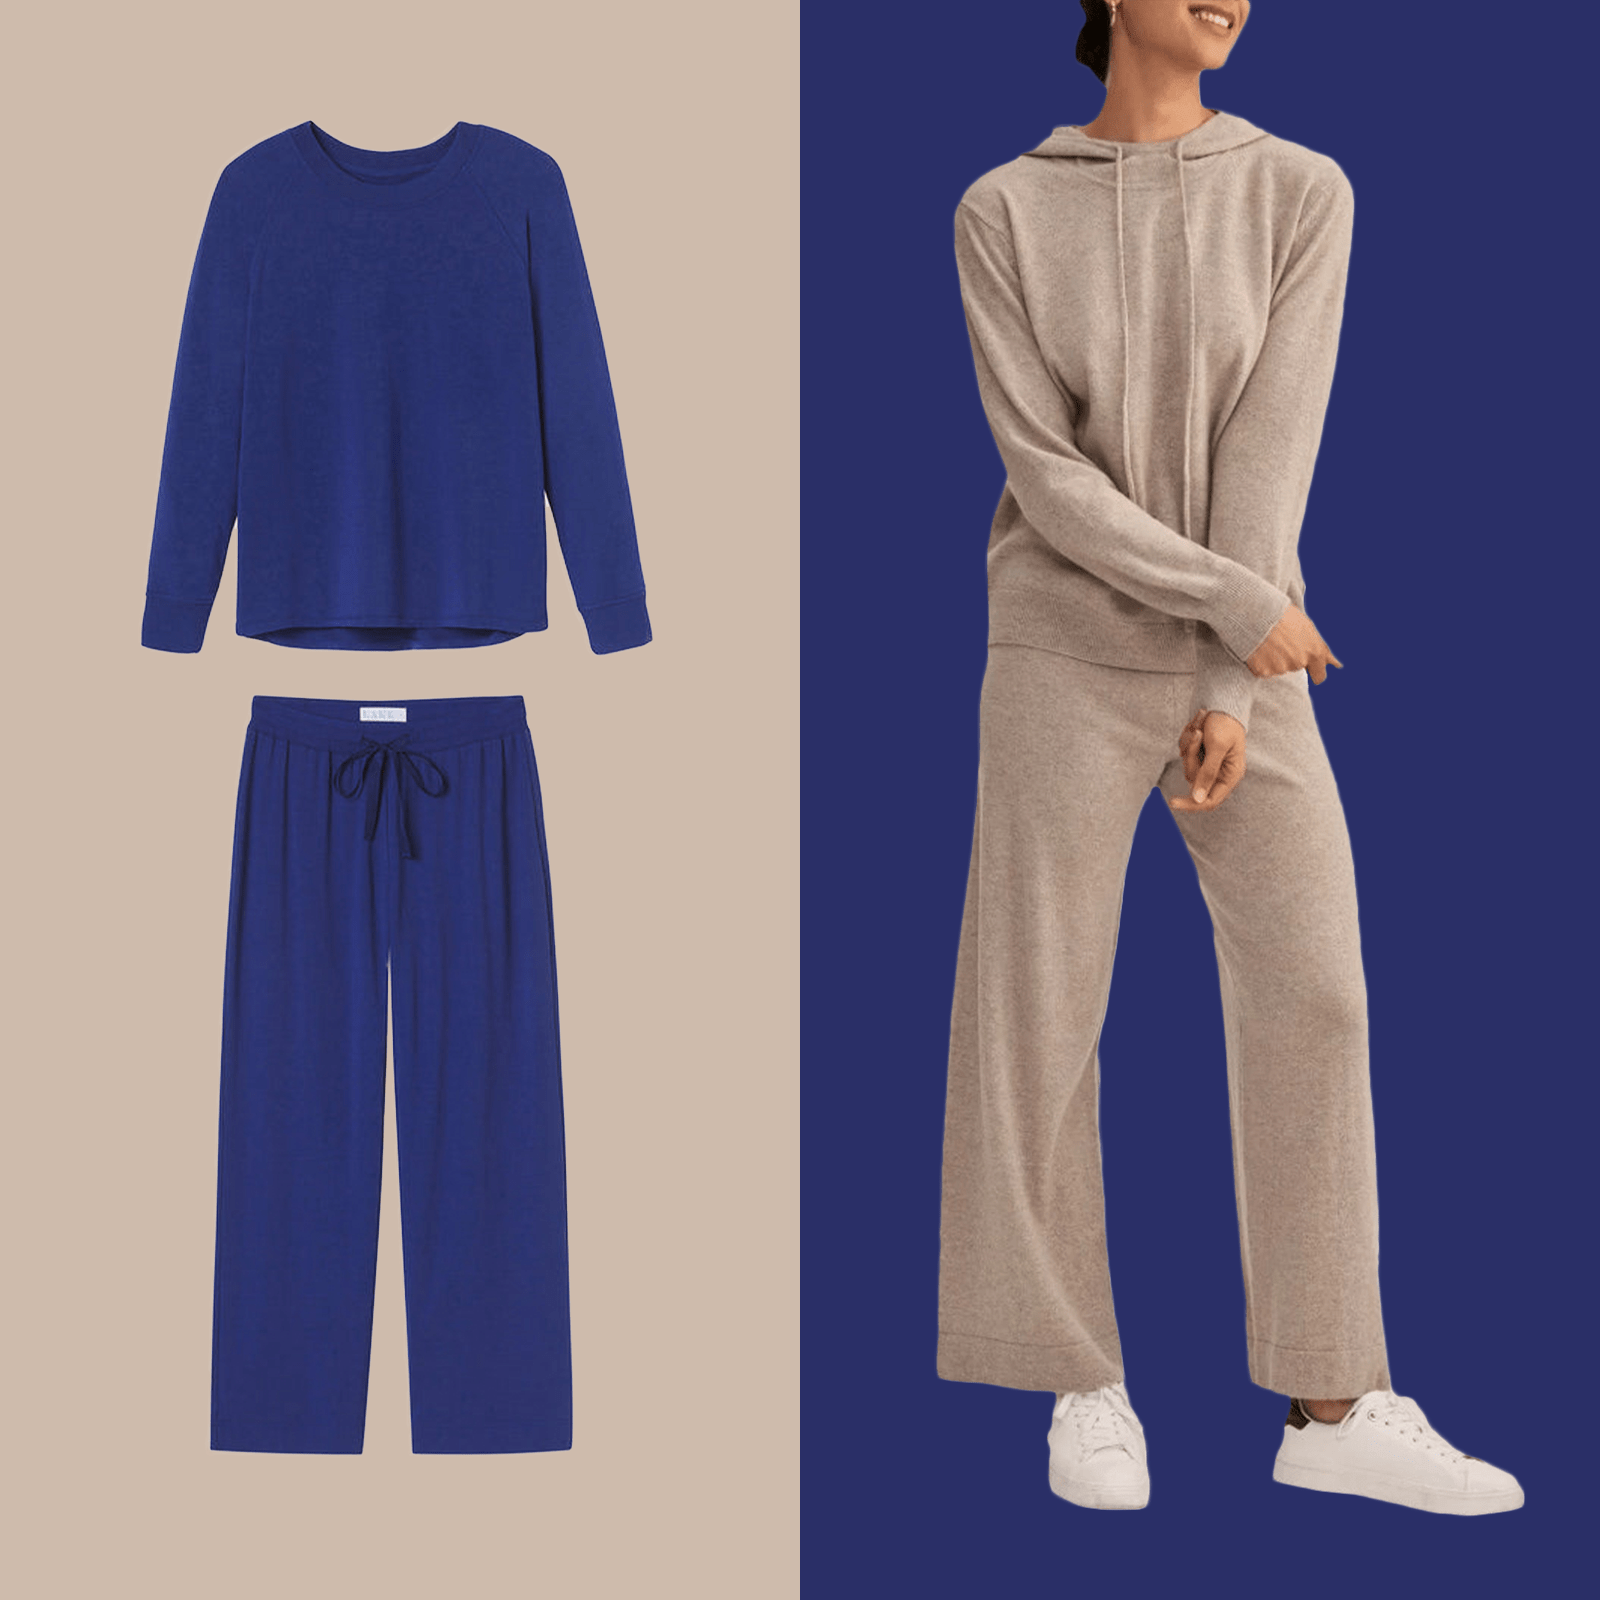 5 Cozy Loungewear Sets for Everyone!